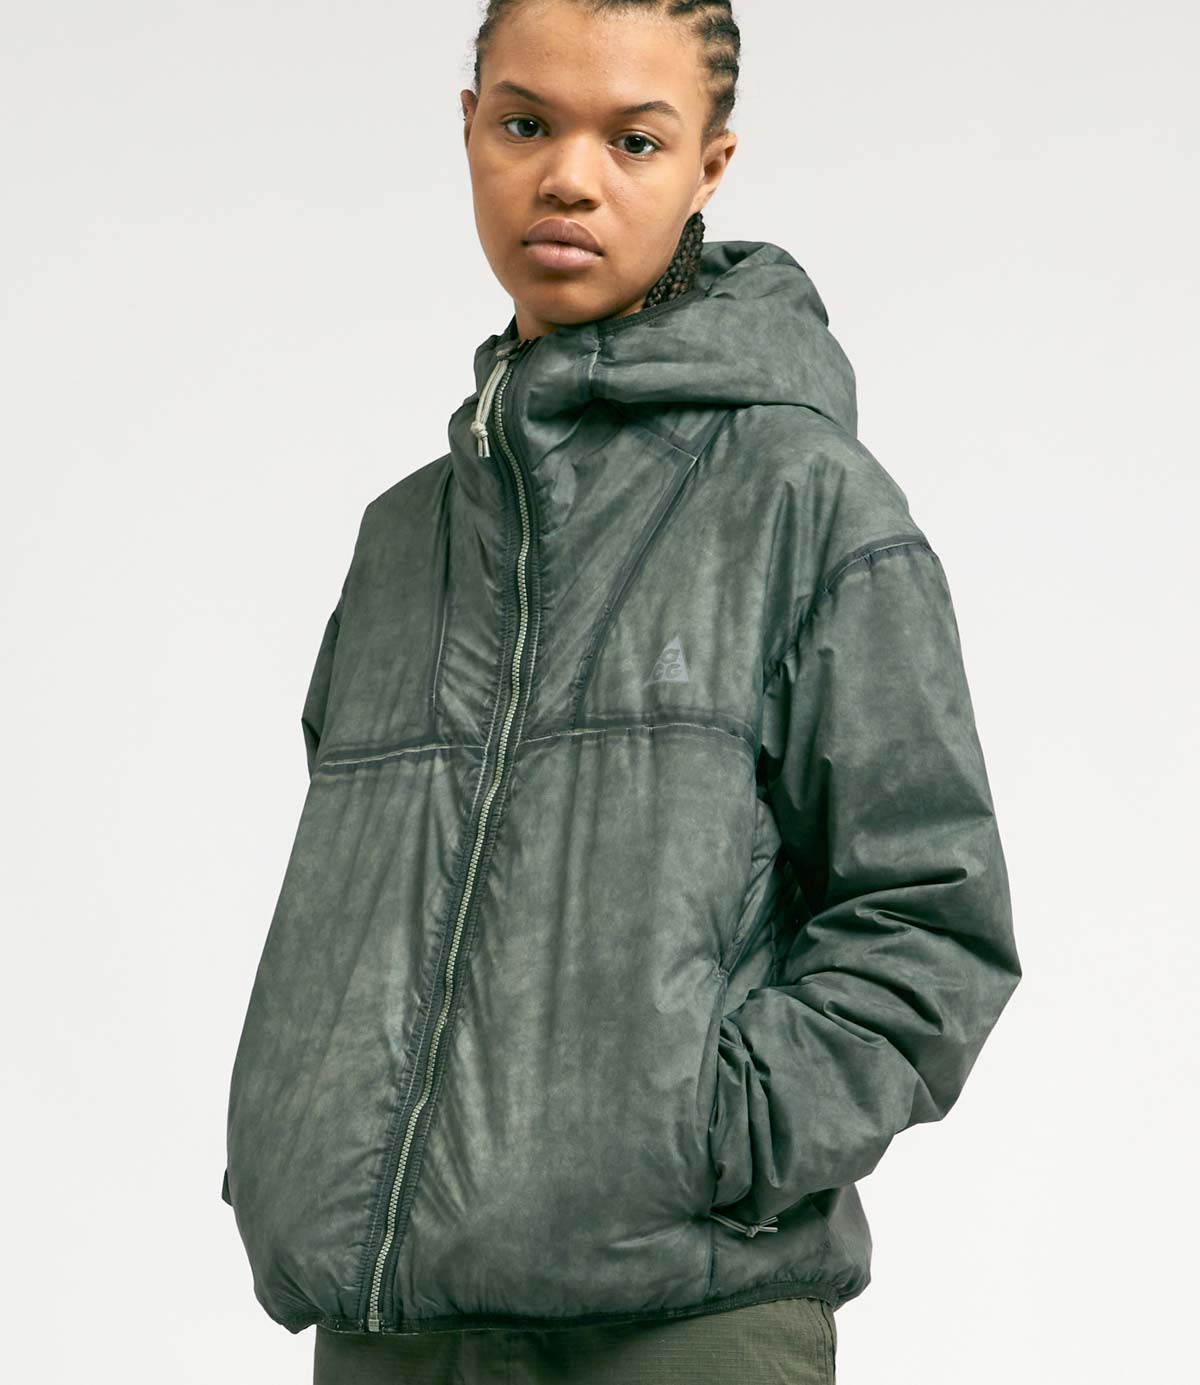 Light Army | FIT Rope De Dope Jacket - Nike ACG Womens Therma